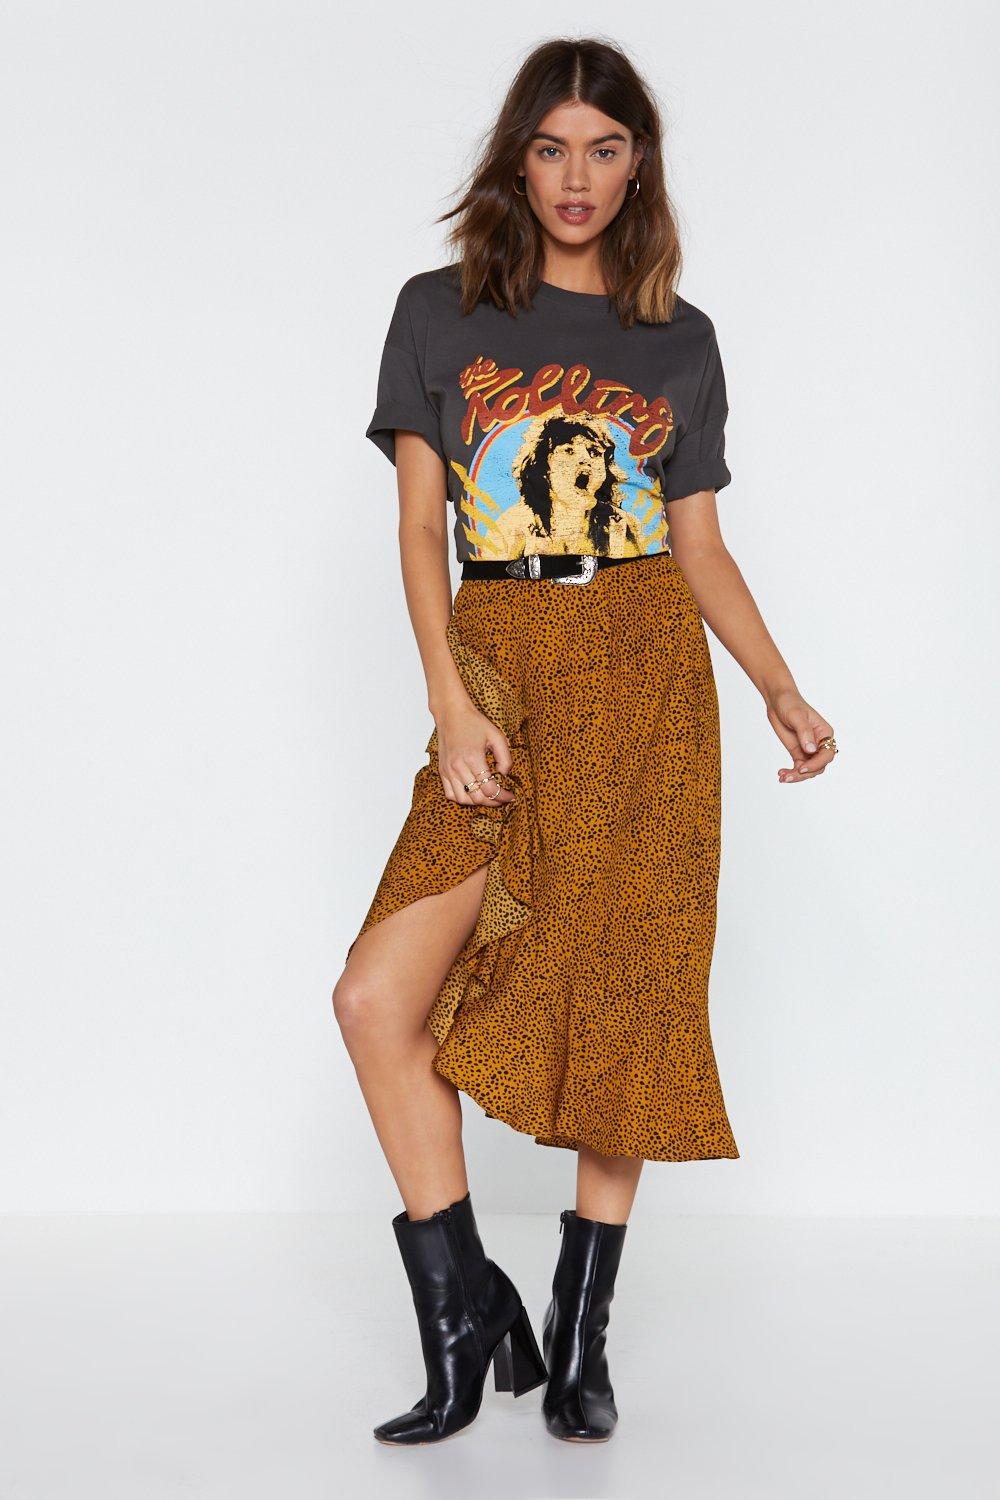 Trends-day Tuesday: The best midi skirts - Good Morning America